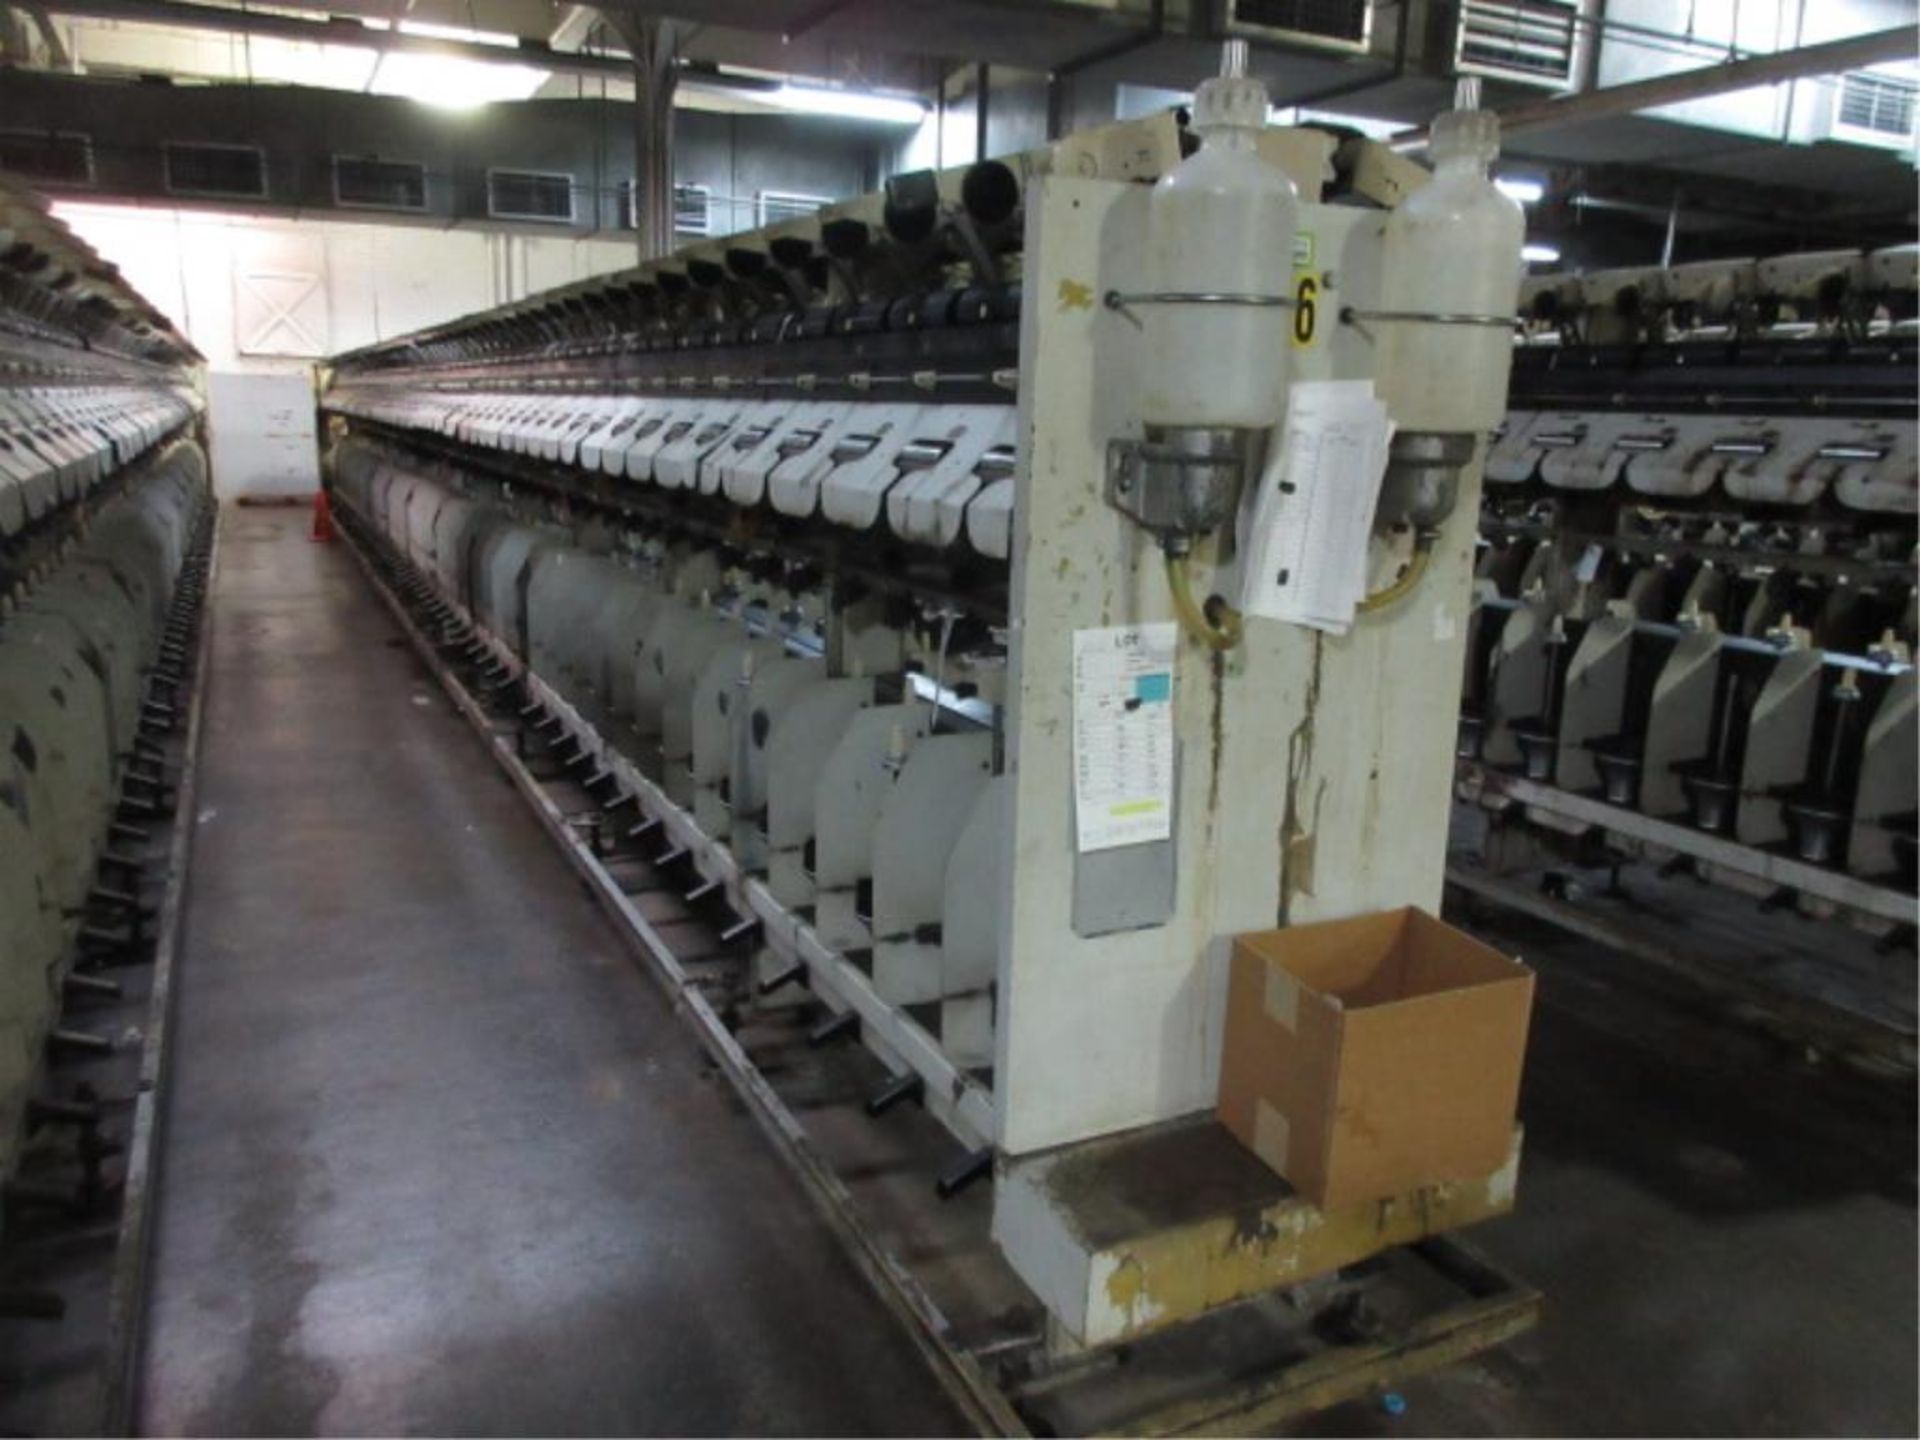 ACBF 3055 BI 2X1 Twisting Machine, (1983), 120 spindles, said to be in running condition. SN# T410- - Image 5 of 8